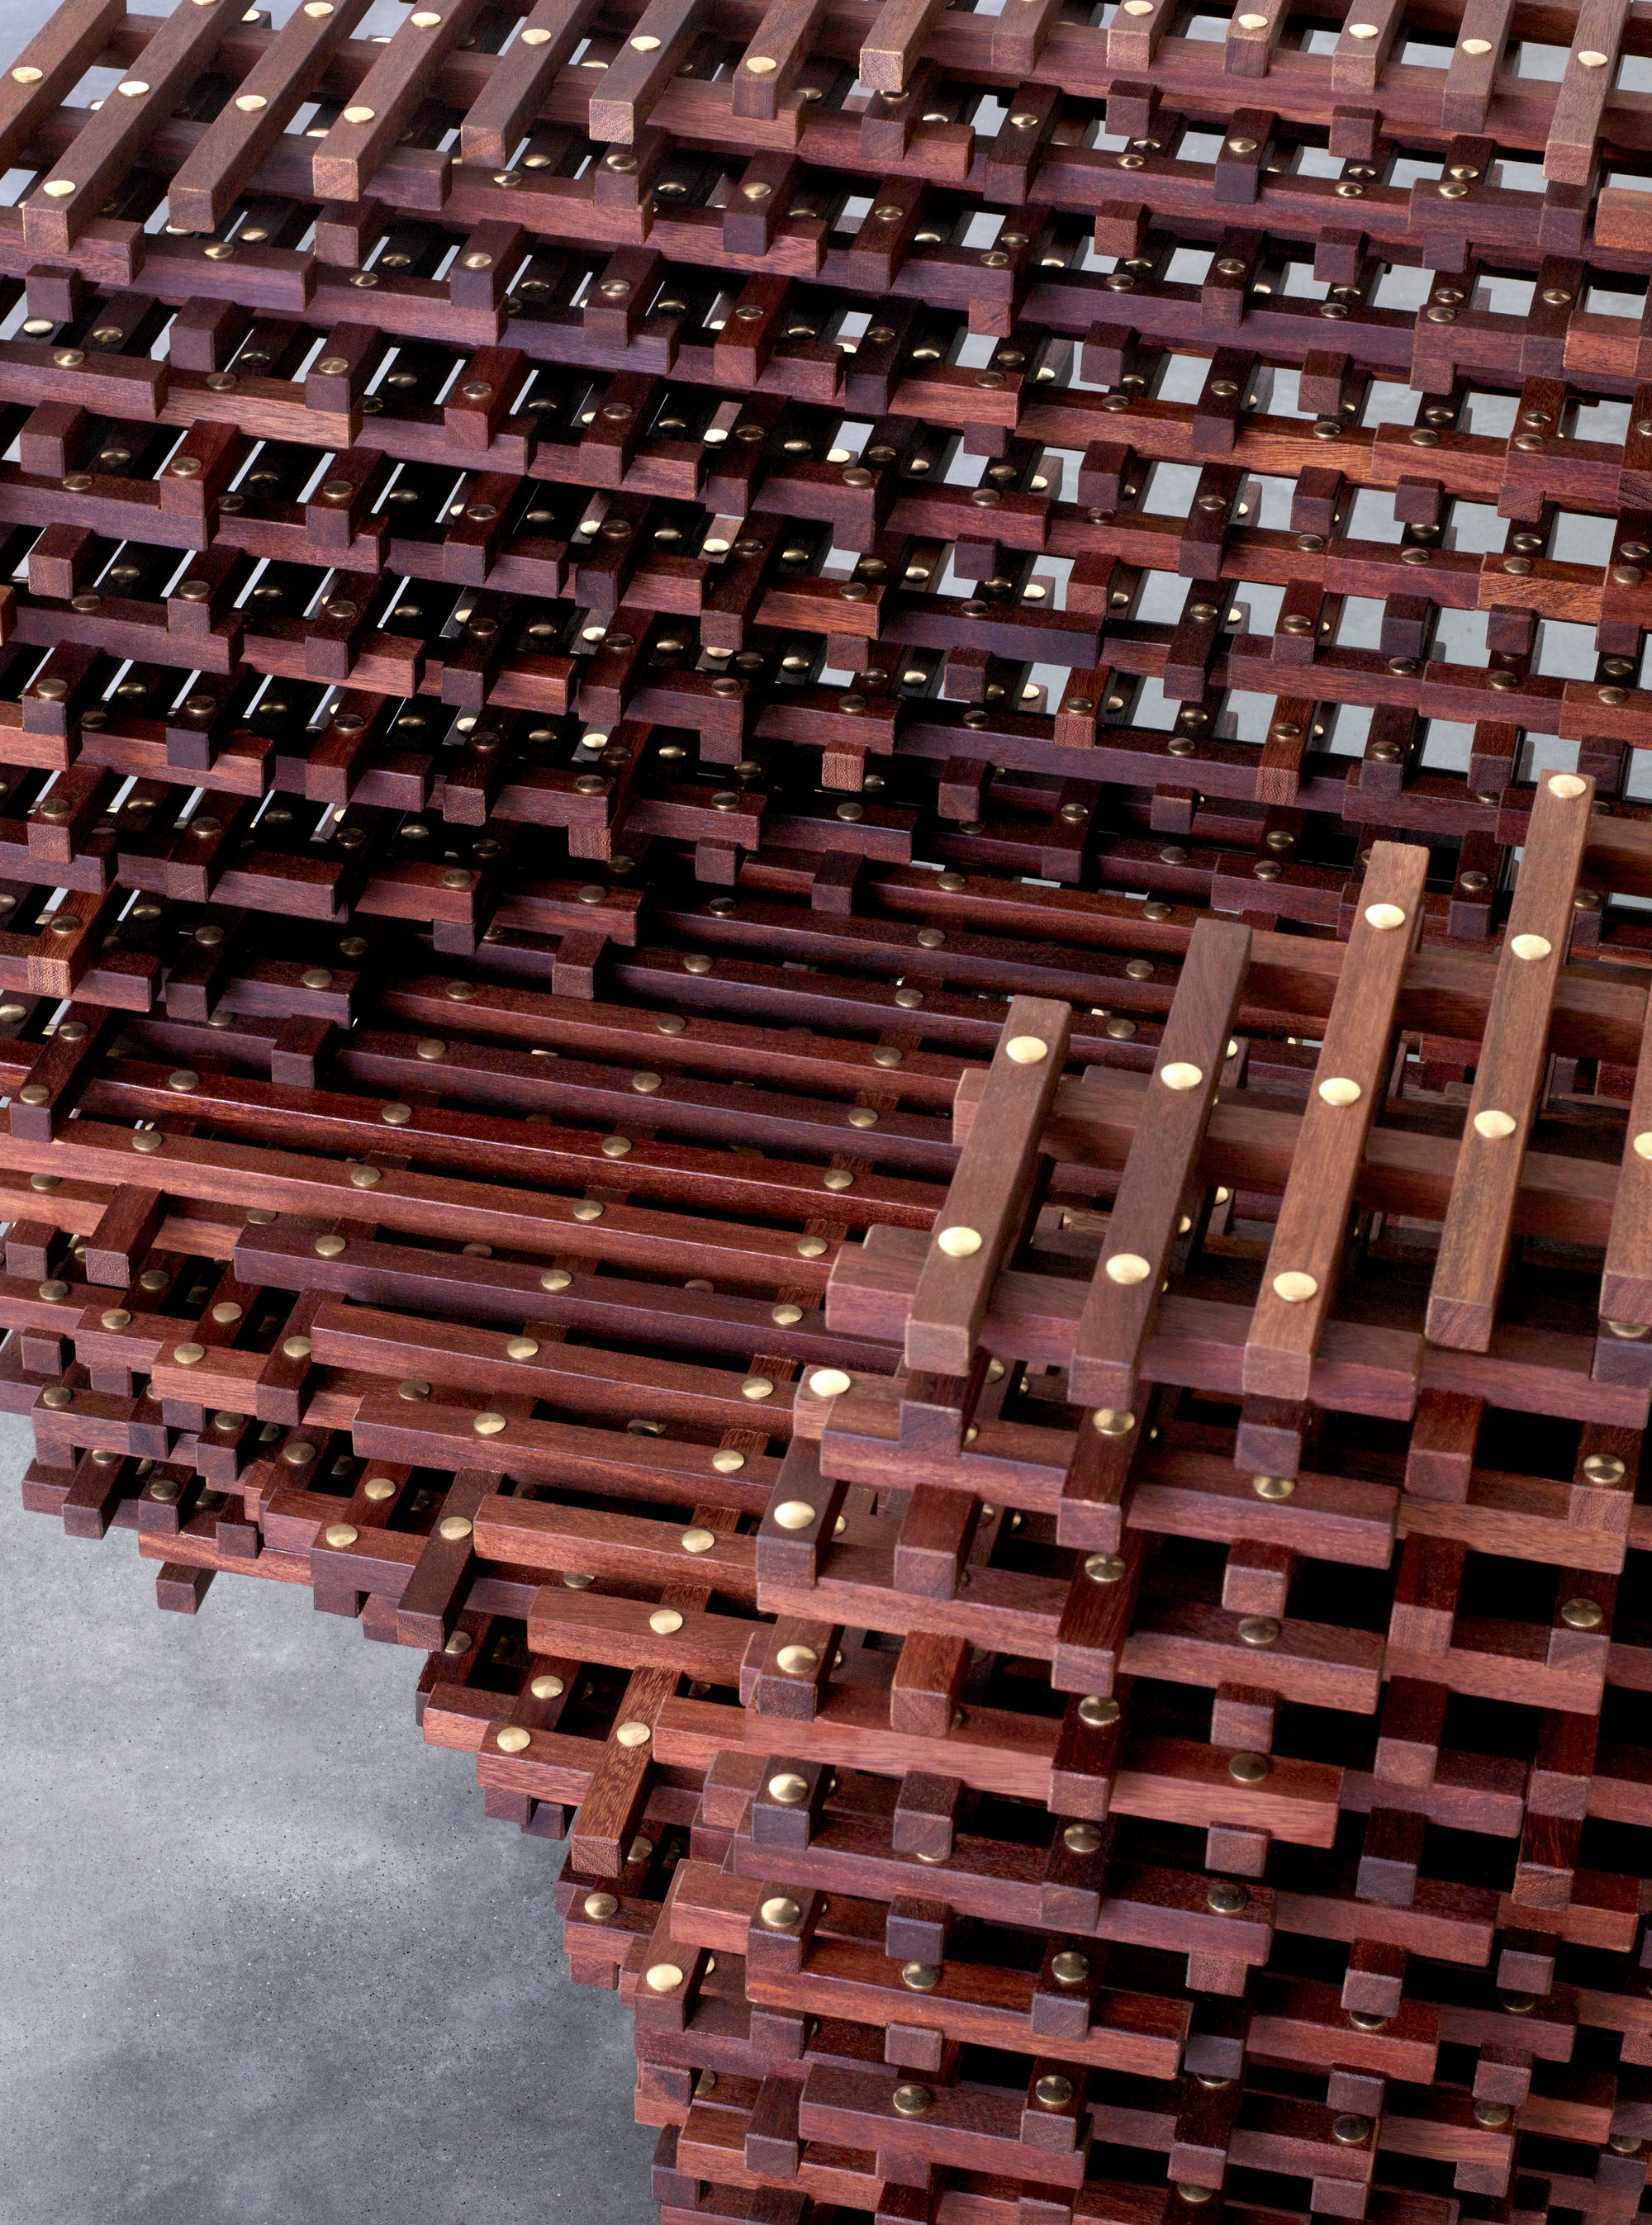 Recycle, Re-invent, Renew! Brodie Neill Creates Beautiful Furniture from Detritus